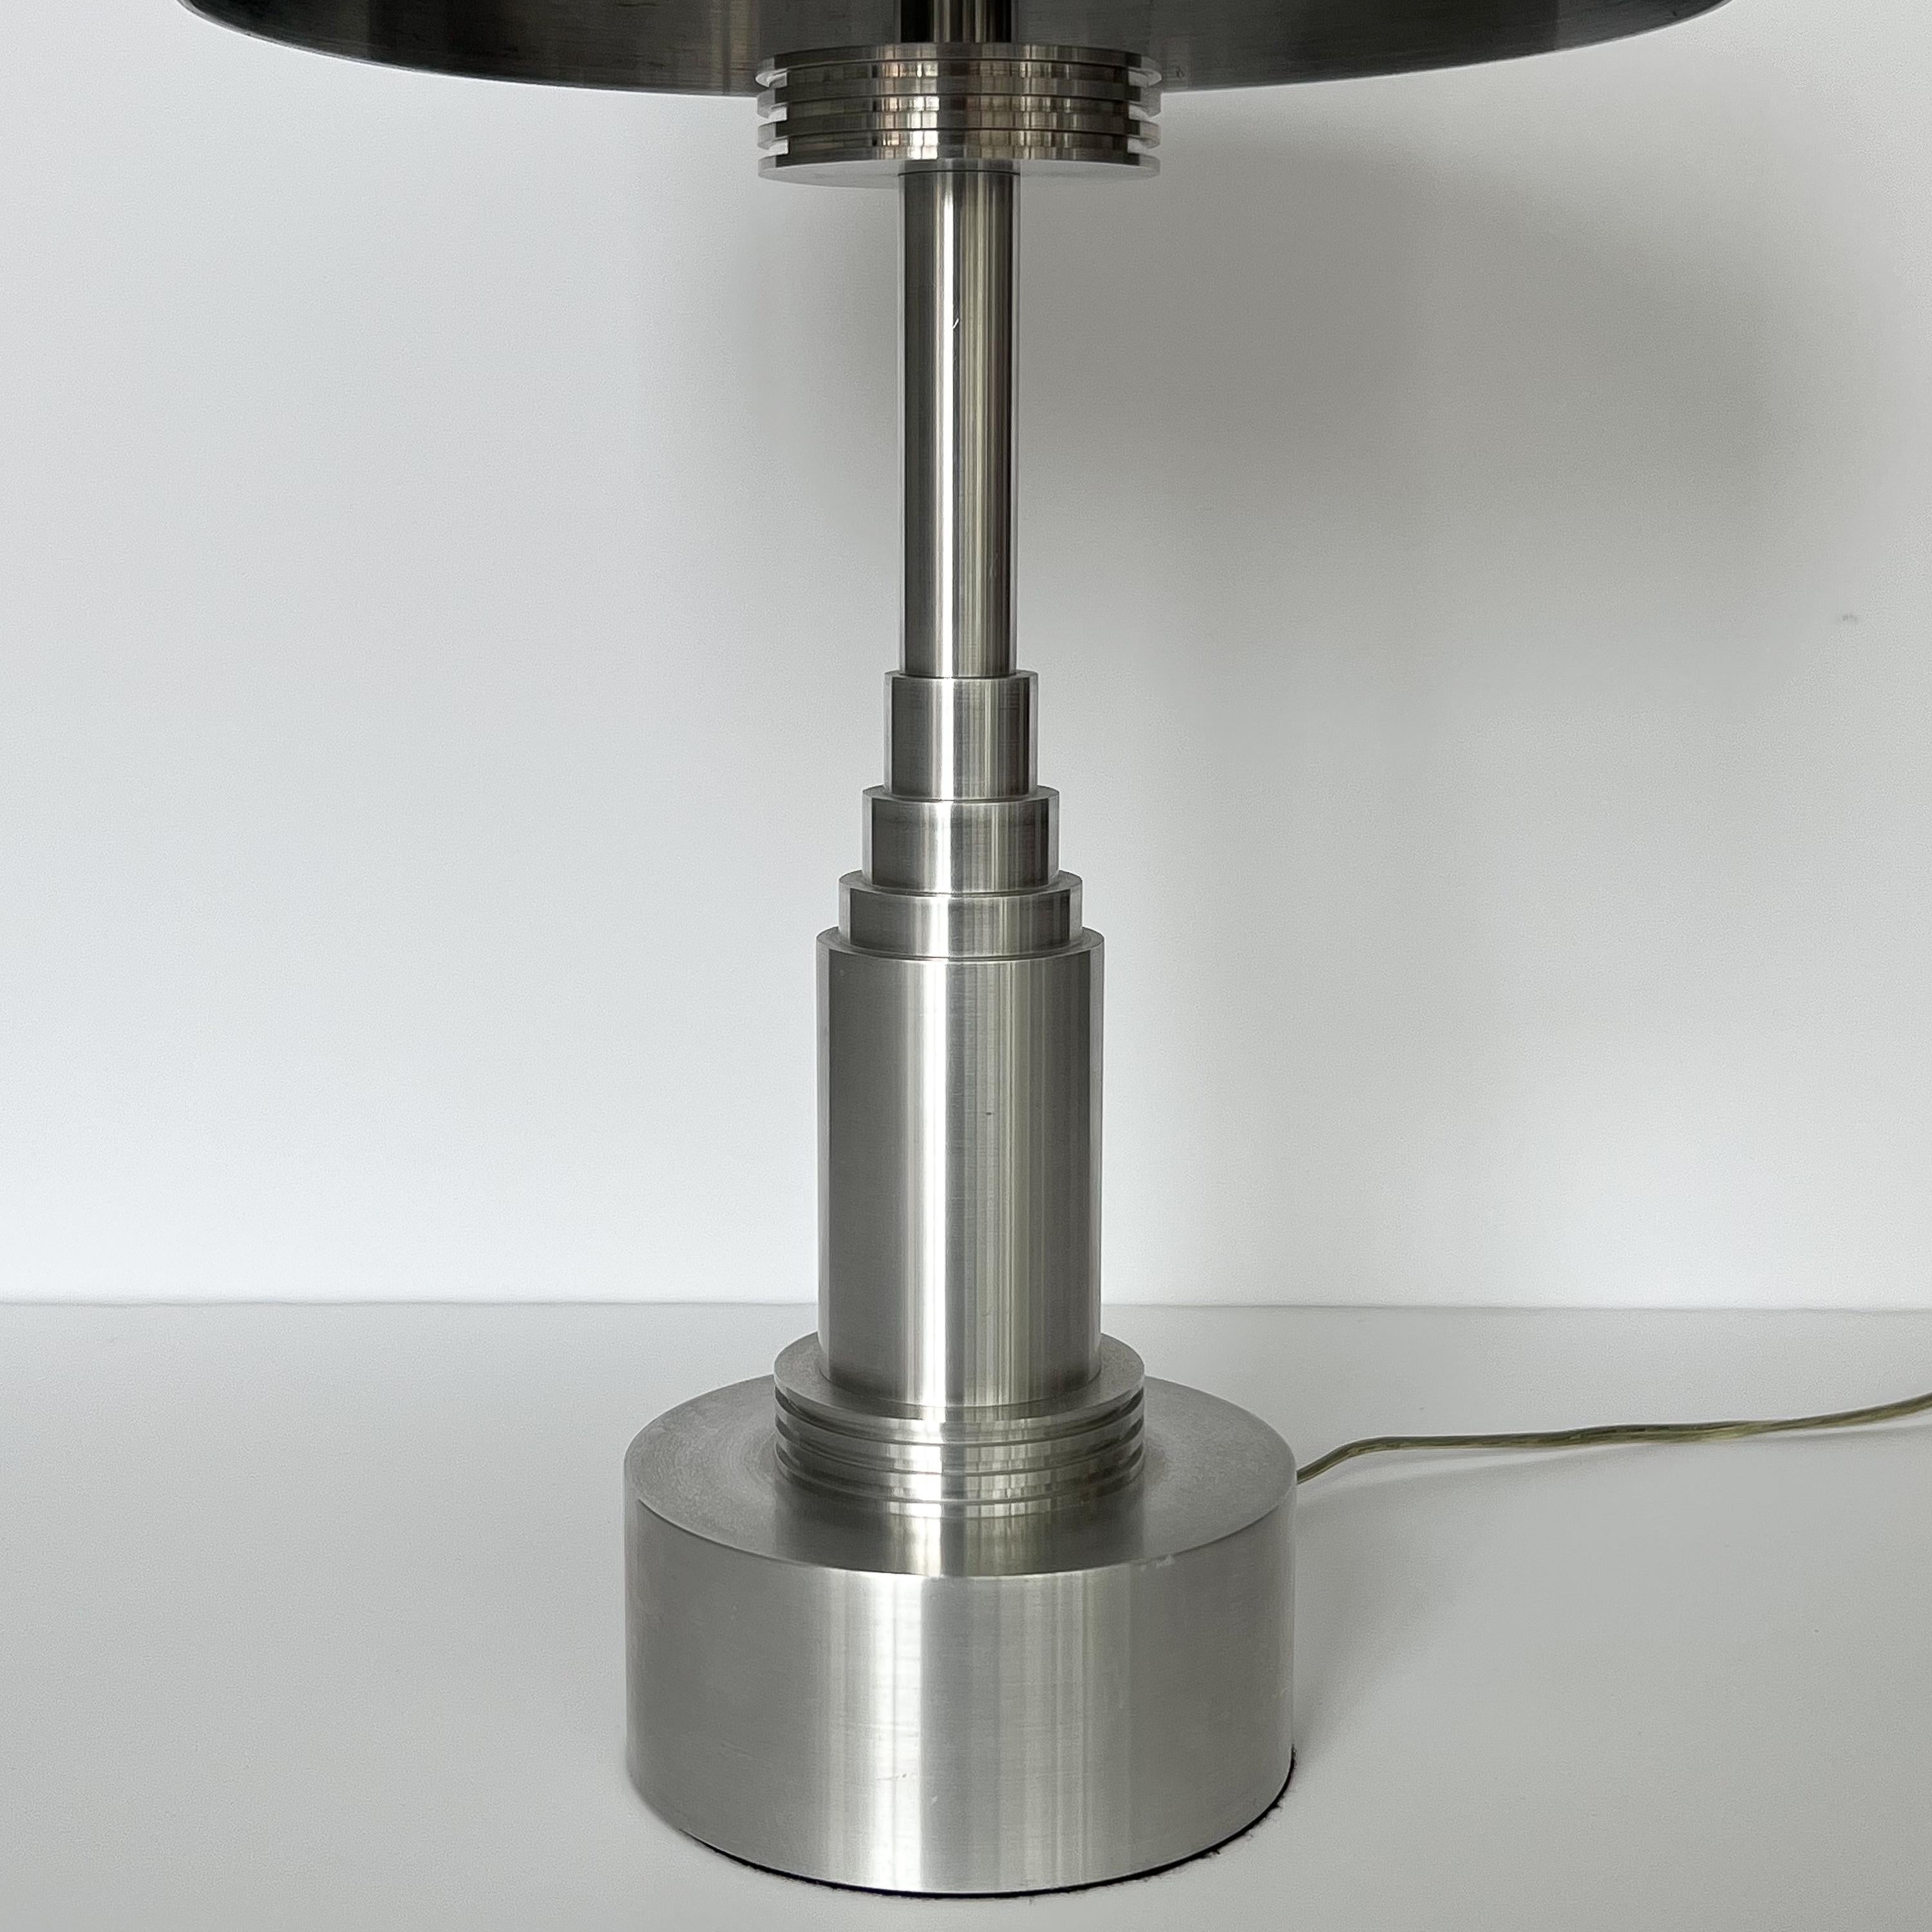 Pair of Art Deco / Machine Age Table Lamps in the Manner of Walter Von Nessen 3